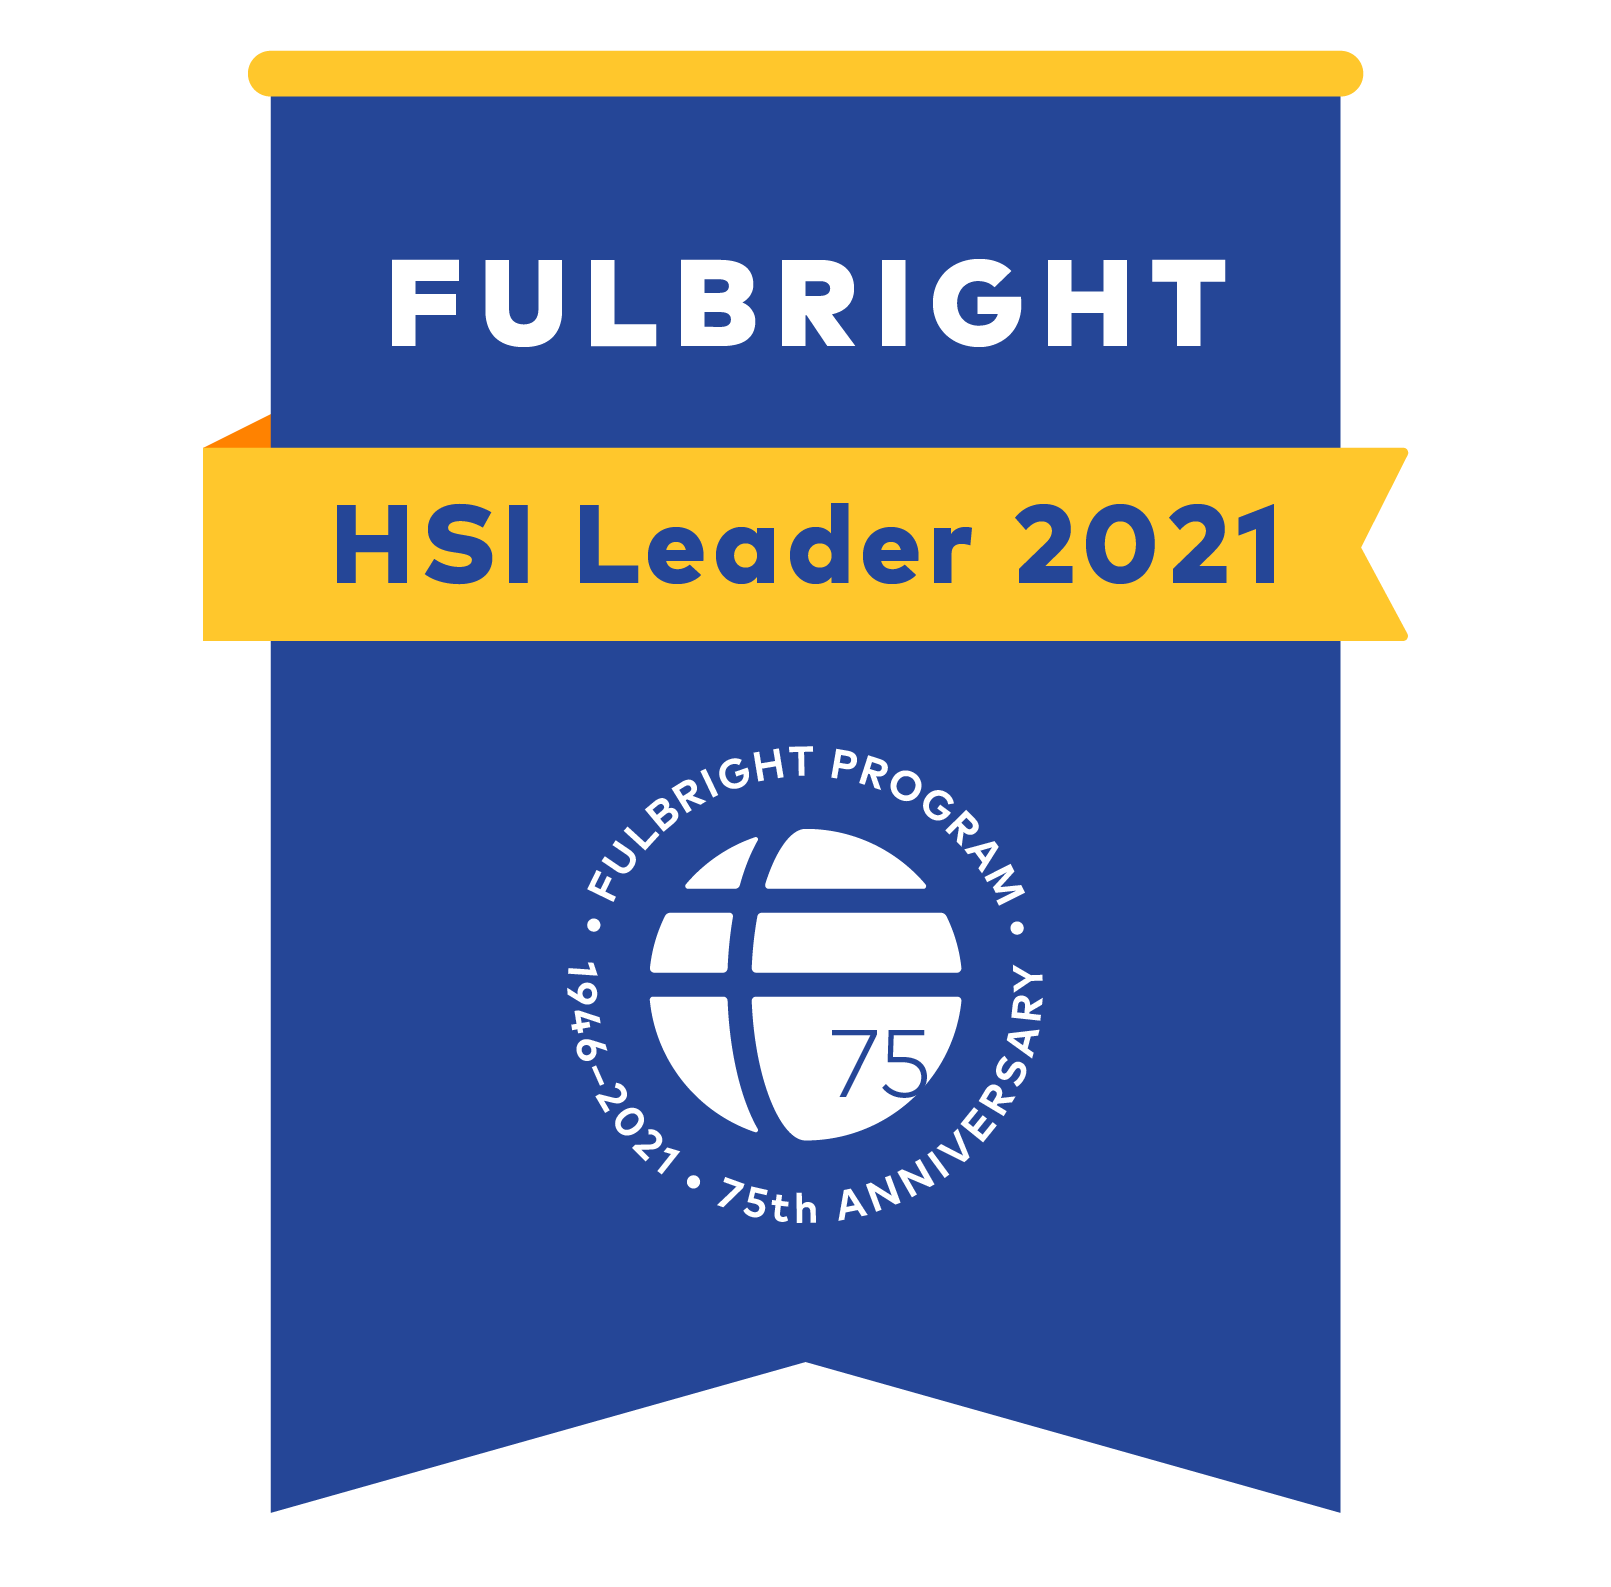 fulbright-badge_hsi_badge.png